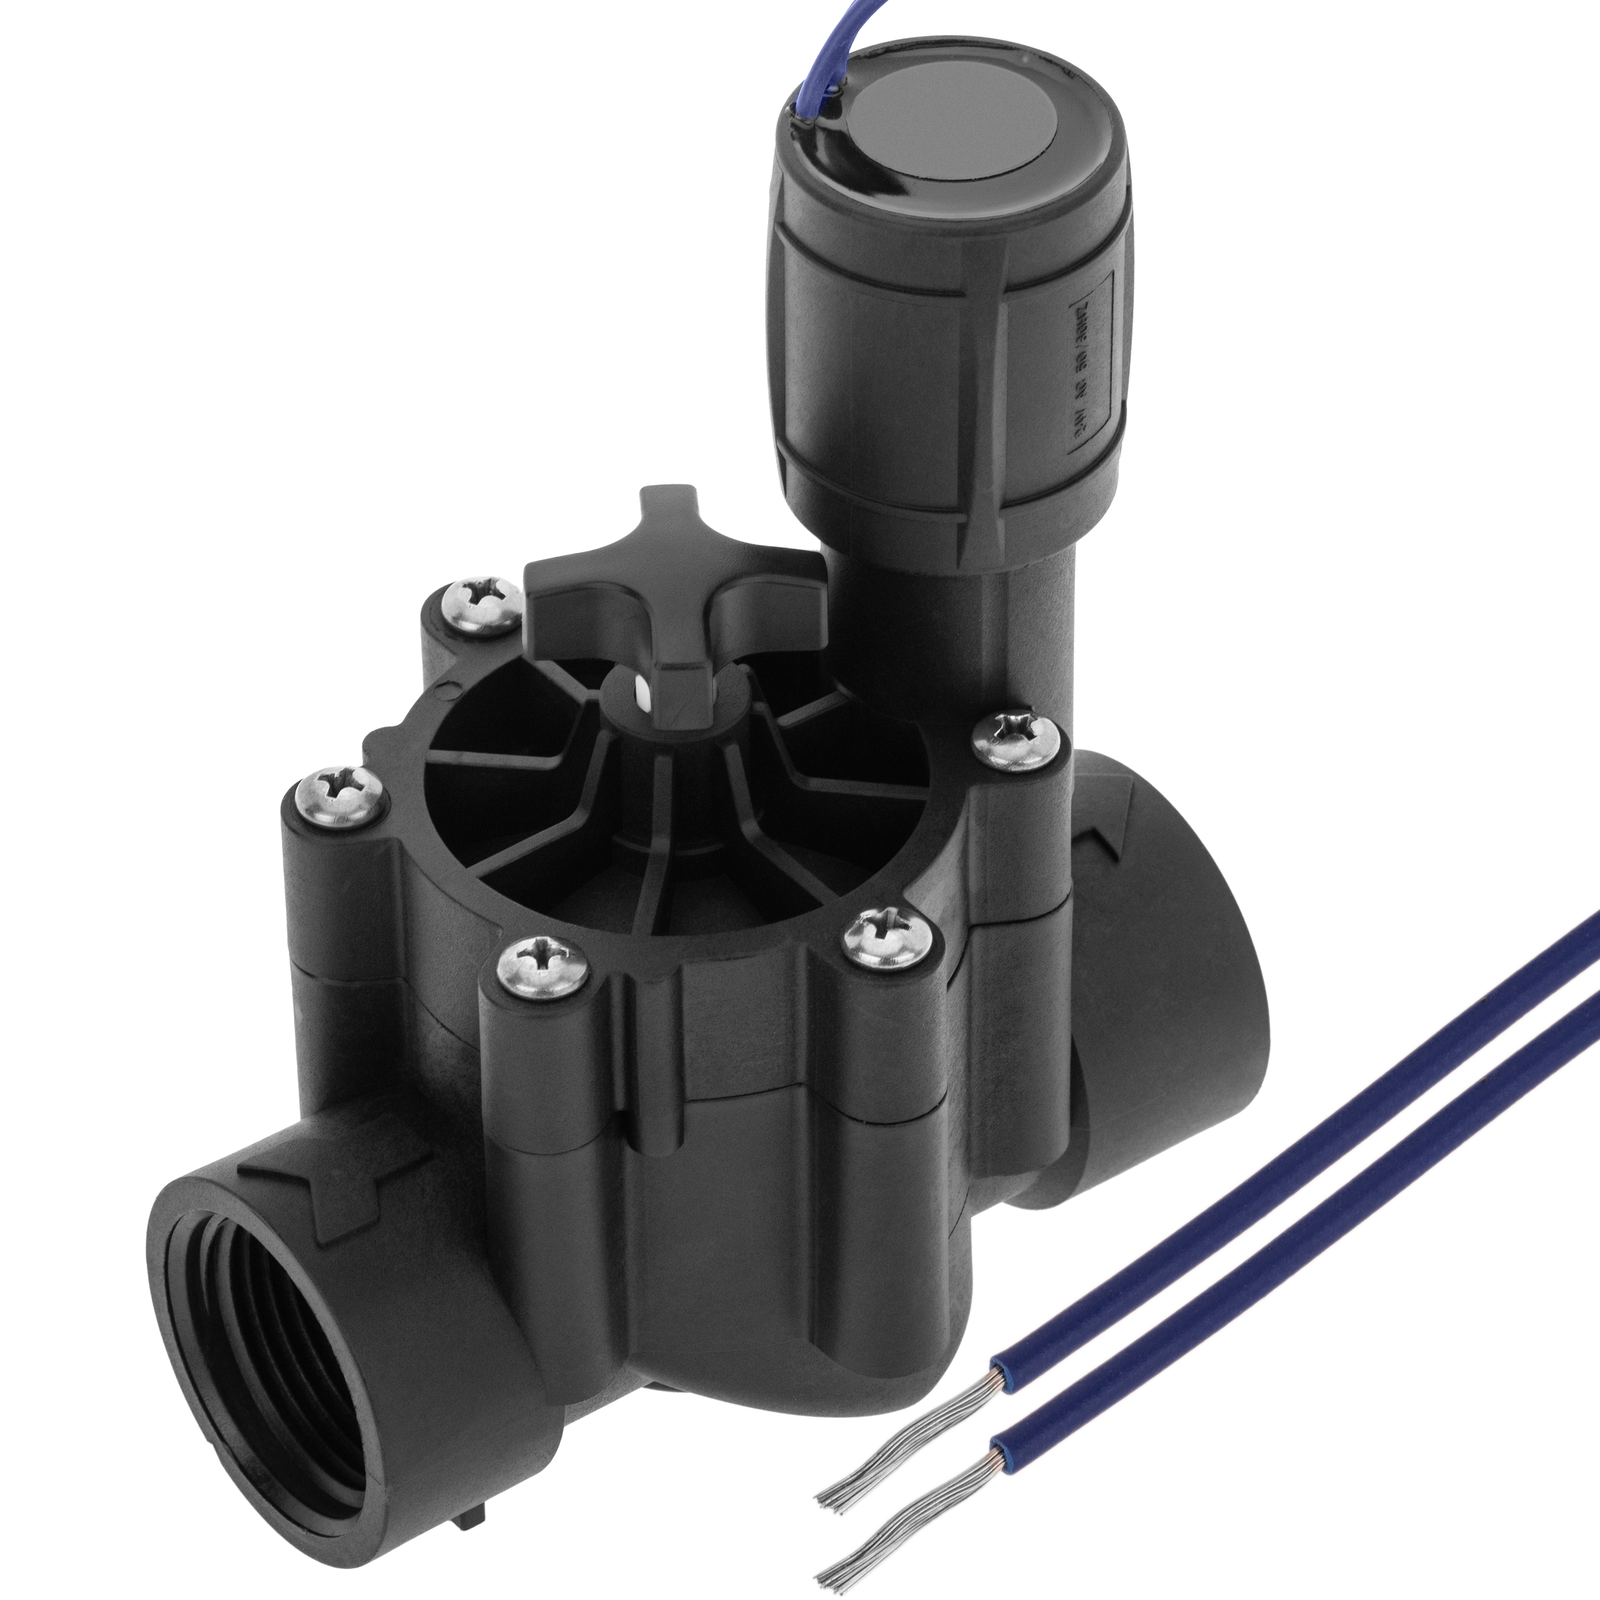 1” solenoid valve for regulating water flow in underground irrigation  systems - Cablematic